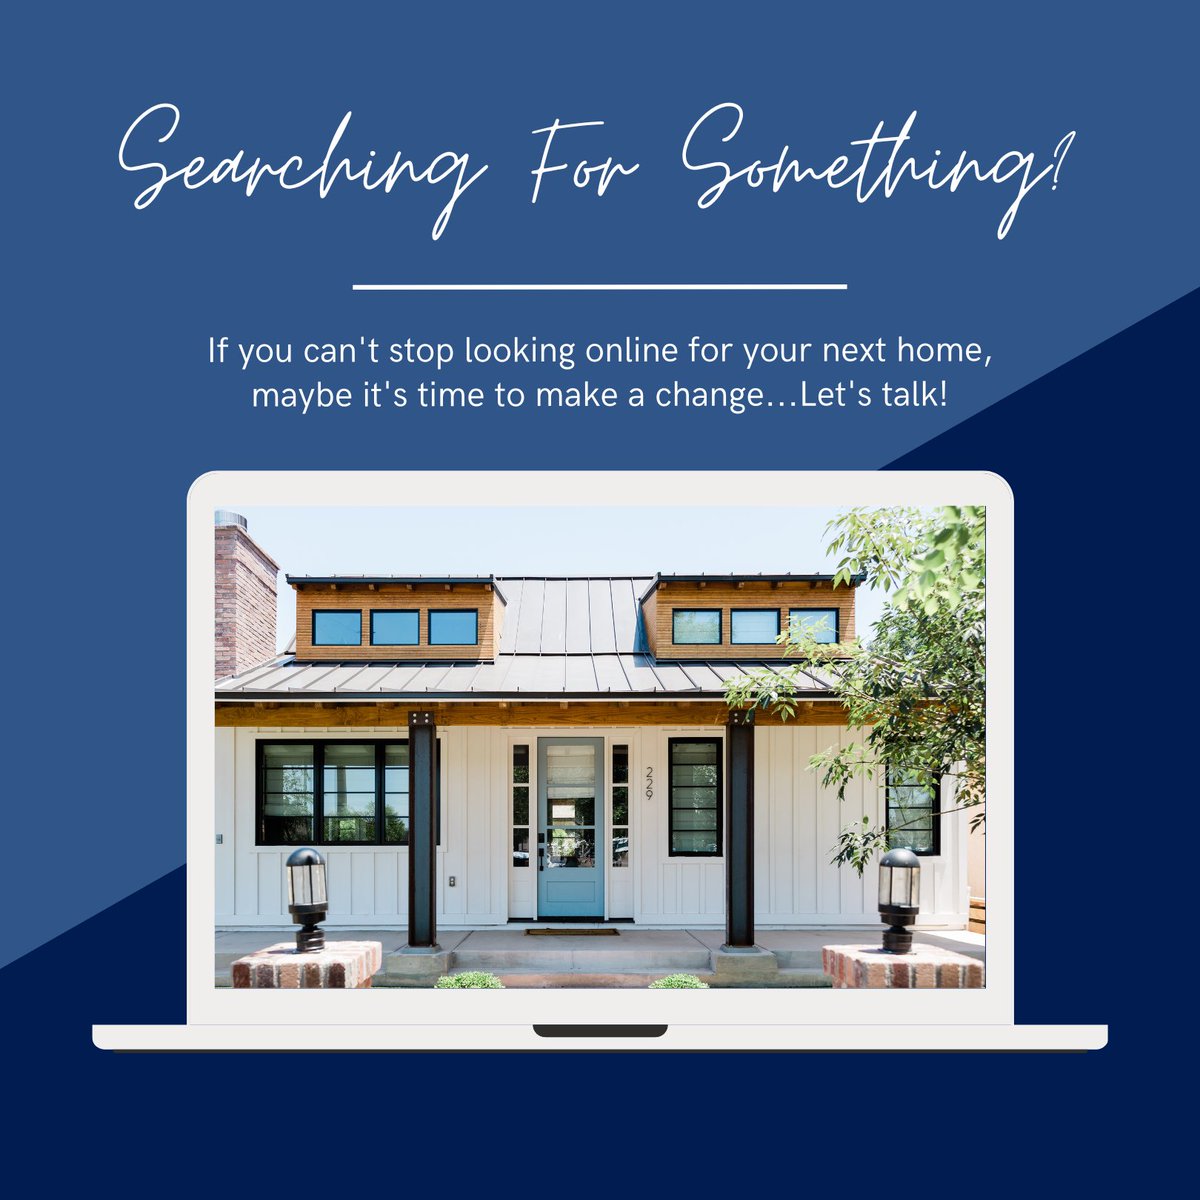 Continually looking at new listings online? Let's do something about it!

#NYCwithTLC, #nycrealestate, #faverealty, #nassaucounty, #kingscounty, #sellmyhouse, #firsttimehomebuyer, #wanttomove, #realestategoals, #brooklynlife,... facebook.com/22376457098539…